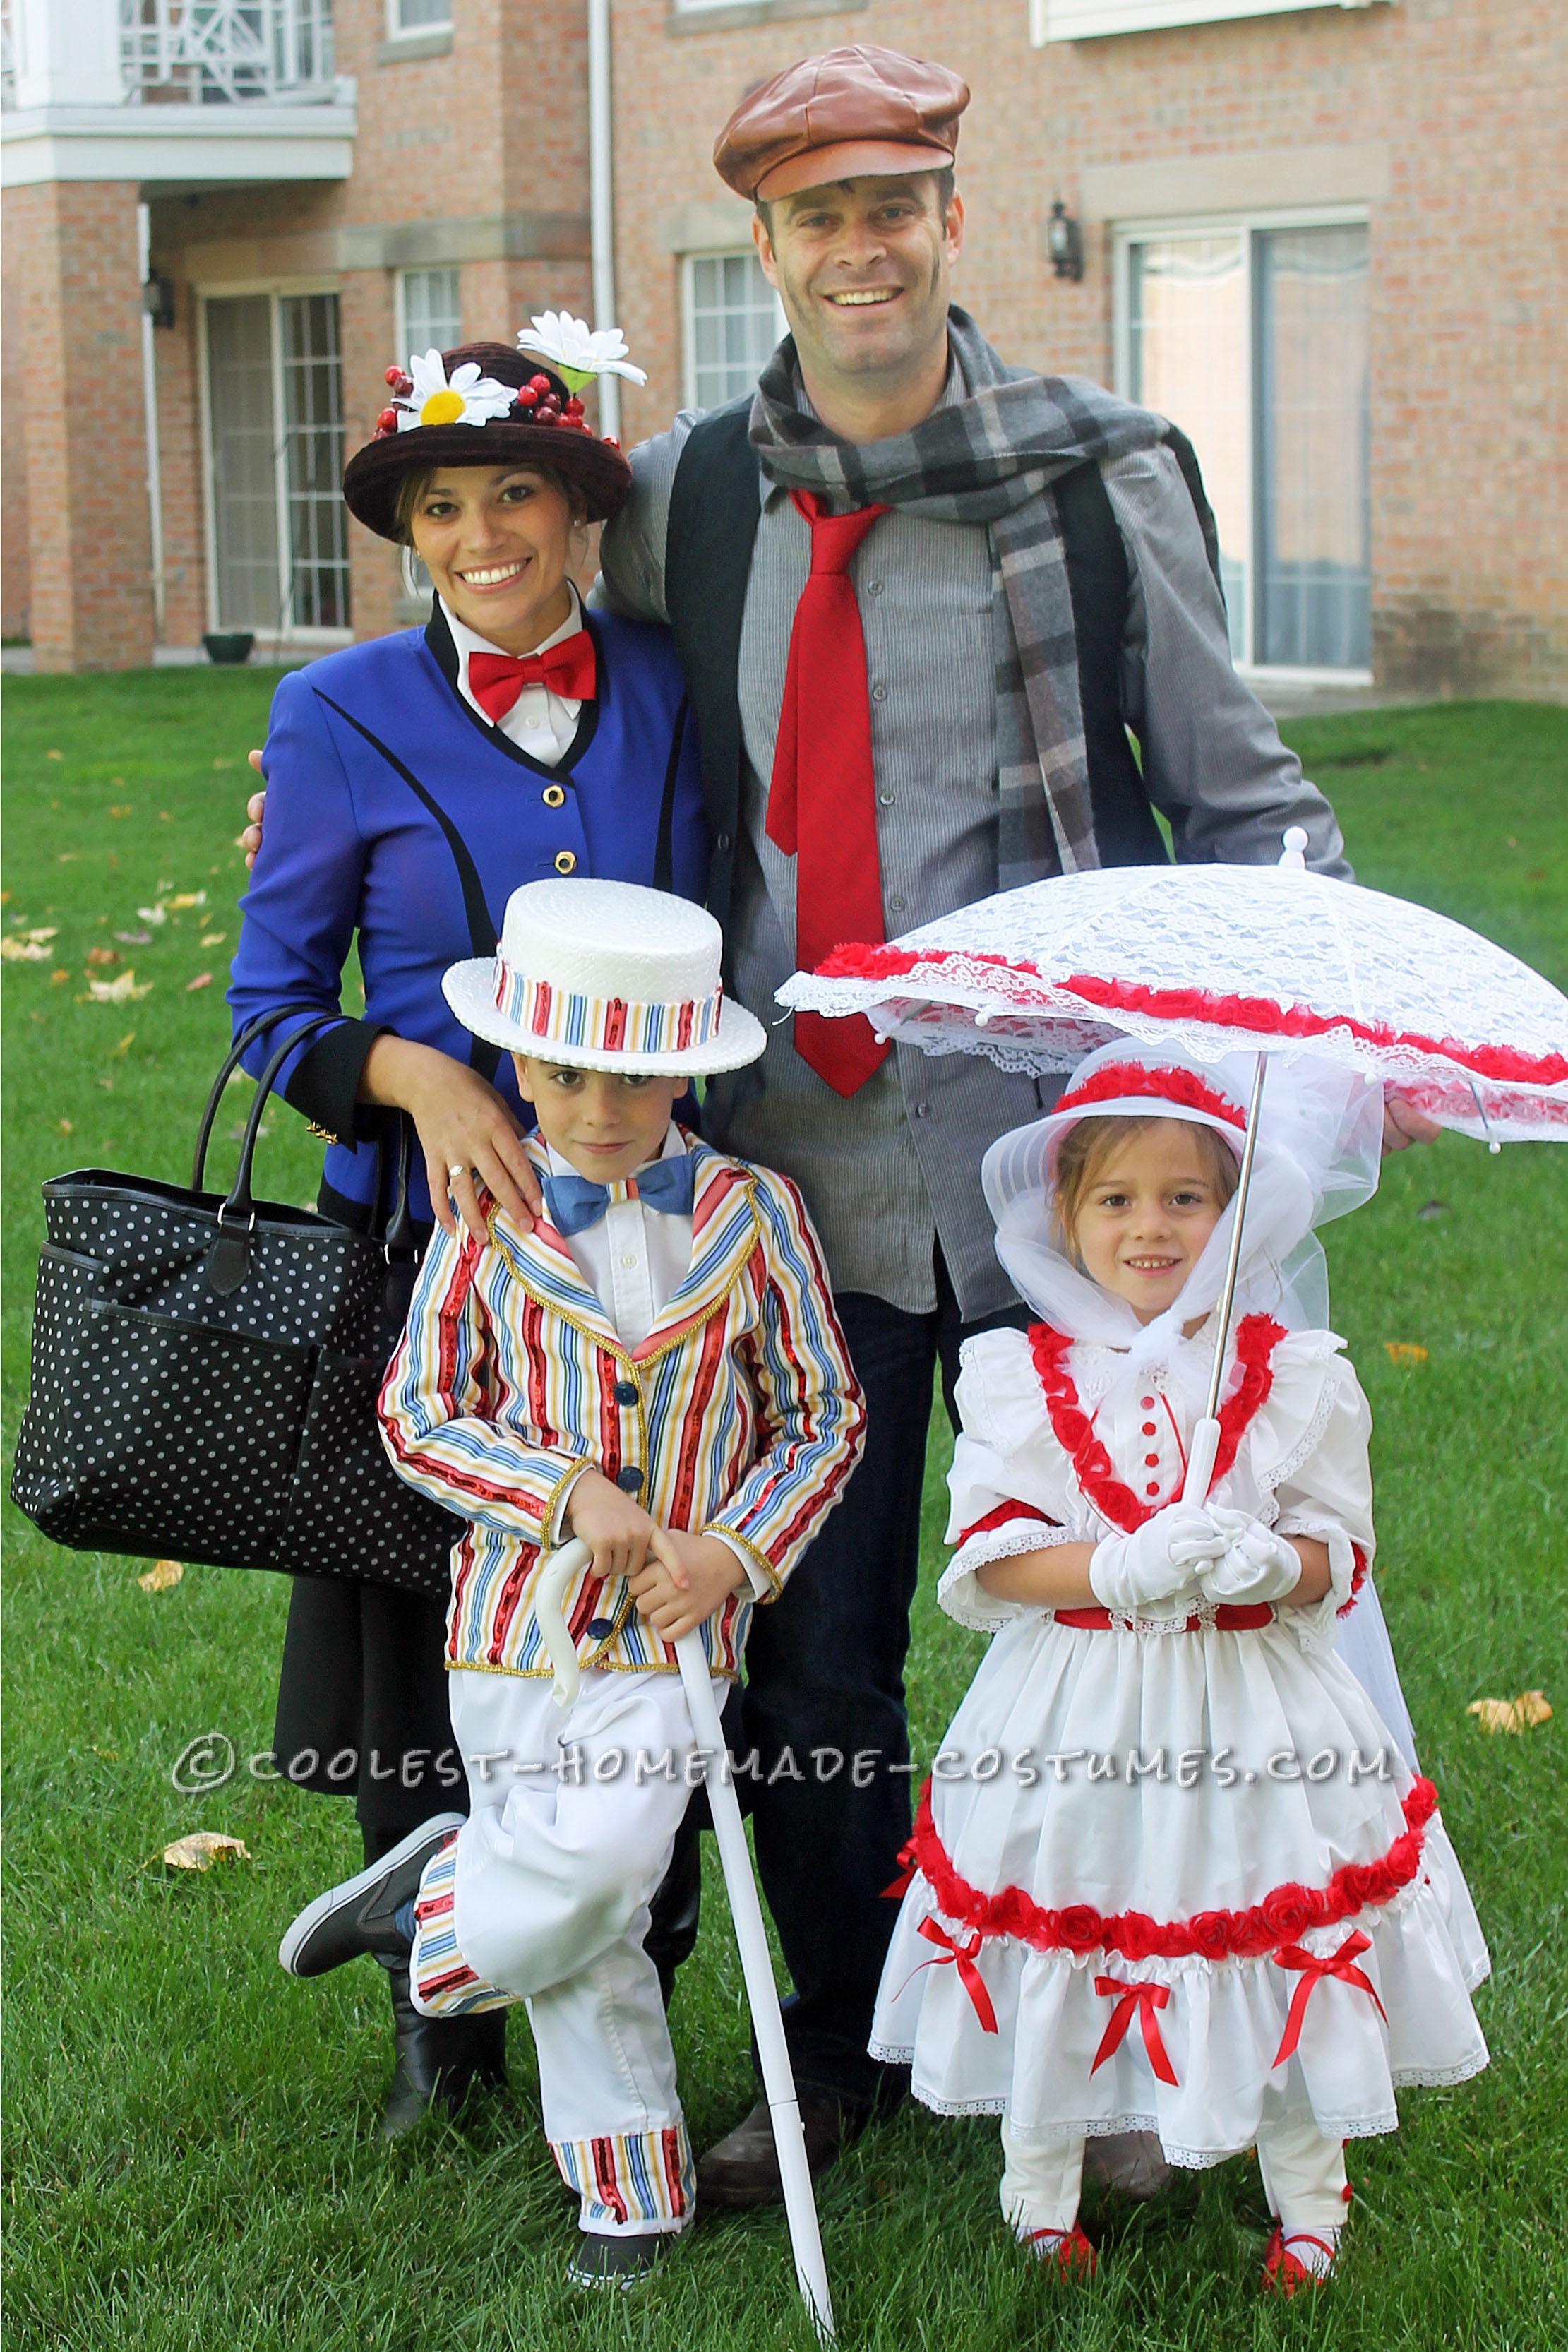 Mary Poppins Family Costume - Practically Perfect in Every Way!